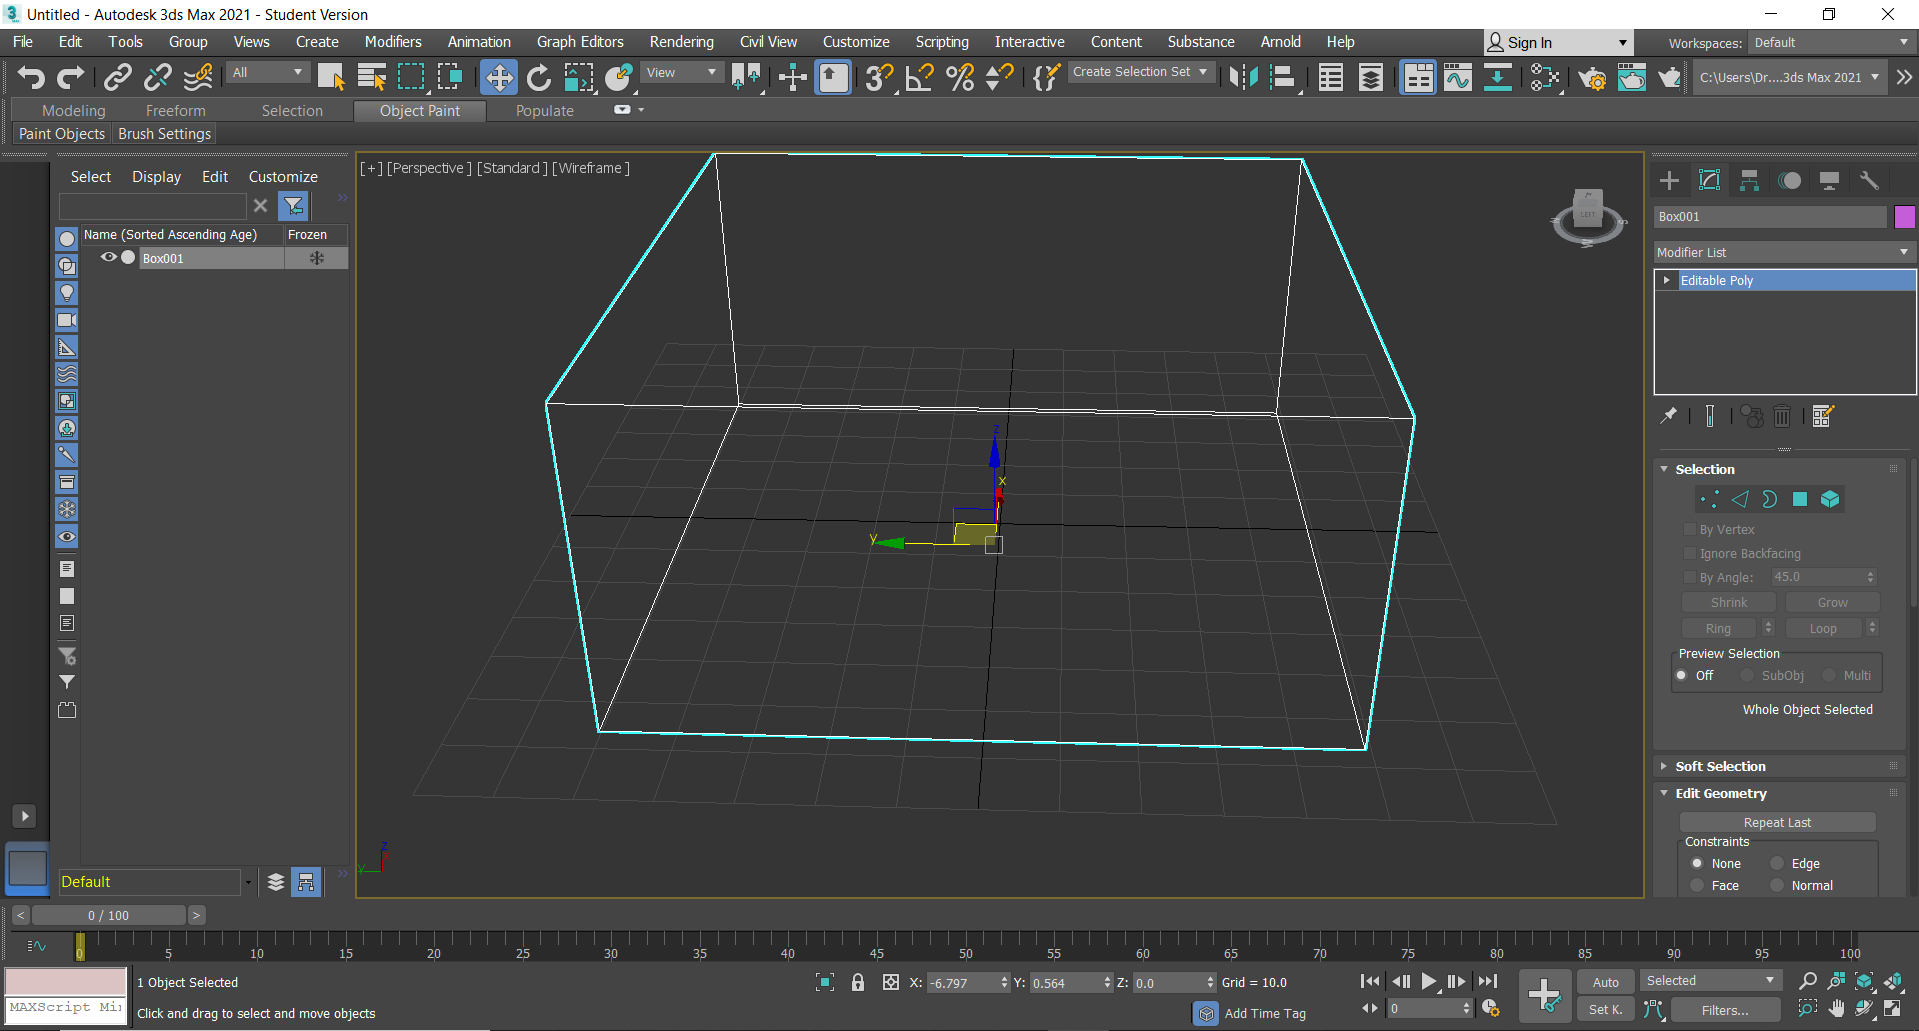 Solved: How to fill the object??? - Autodesk Community - 3ds Max